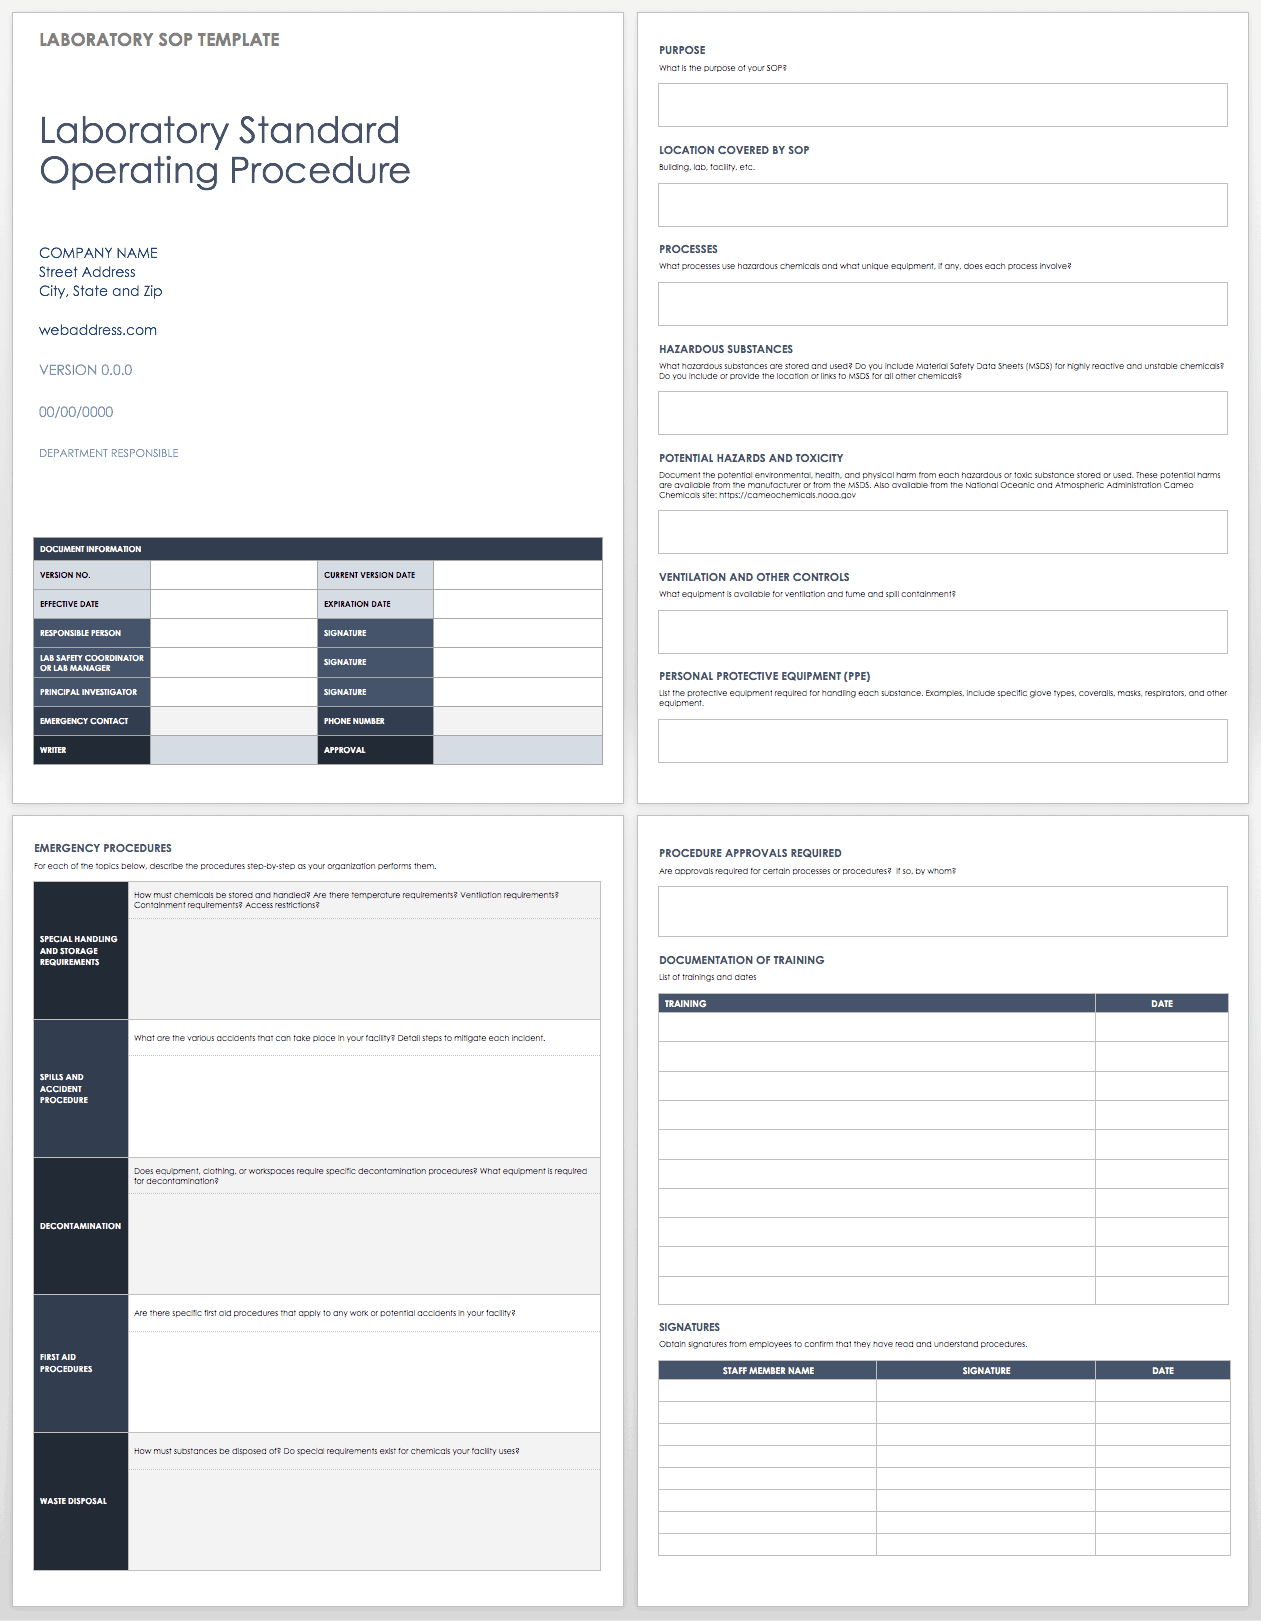 Standard Operating Procedures Templates | Smartsheet With Product Line Card Template Word